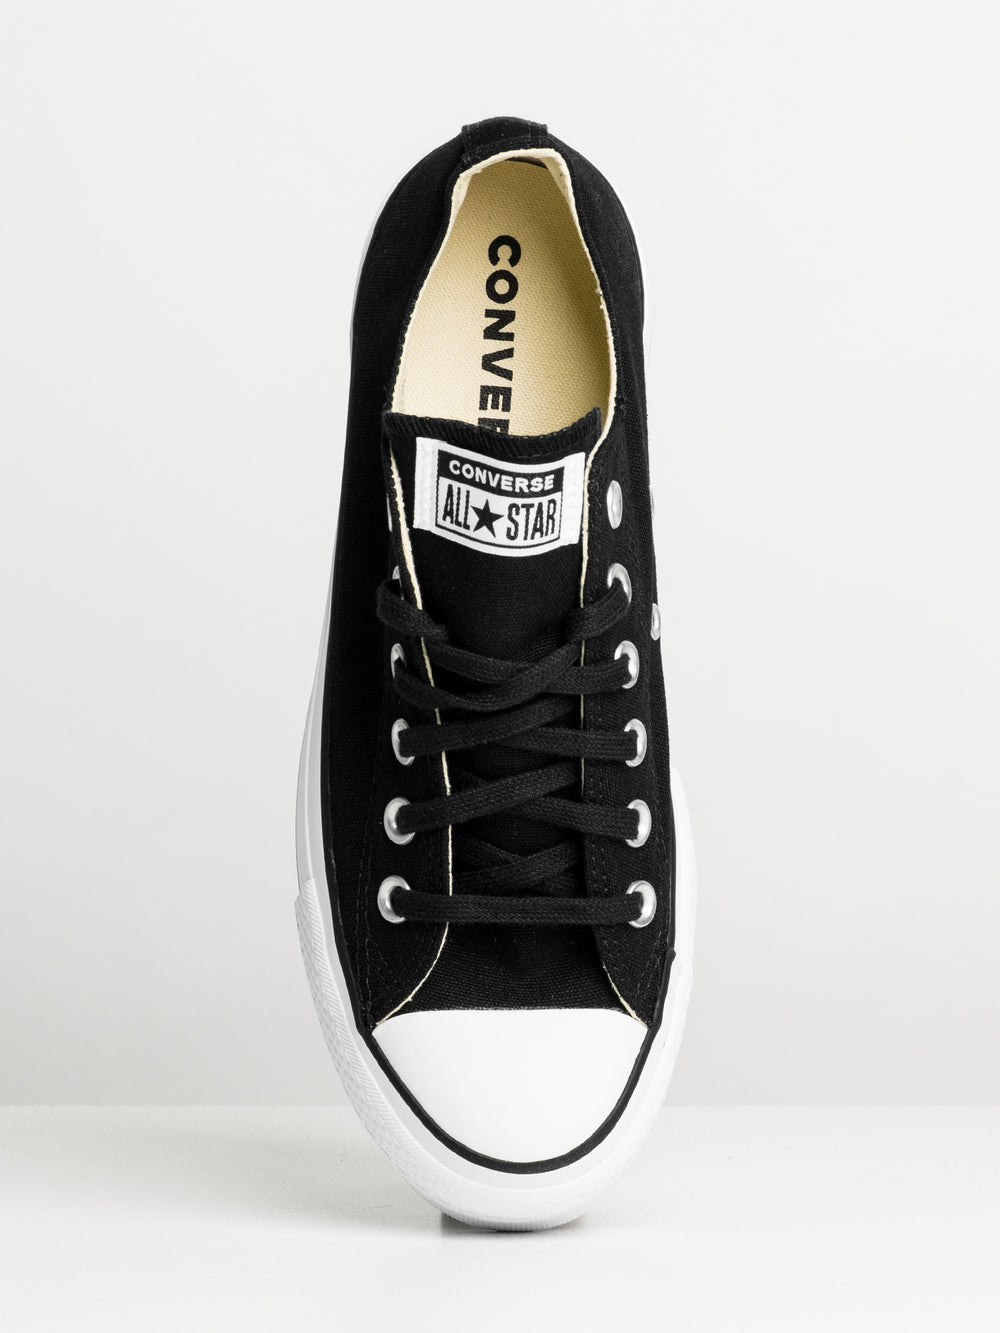 WOMENS CONVERSE CHUCK TAYLOR ALL STAR LIFT SHOES